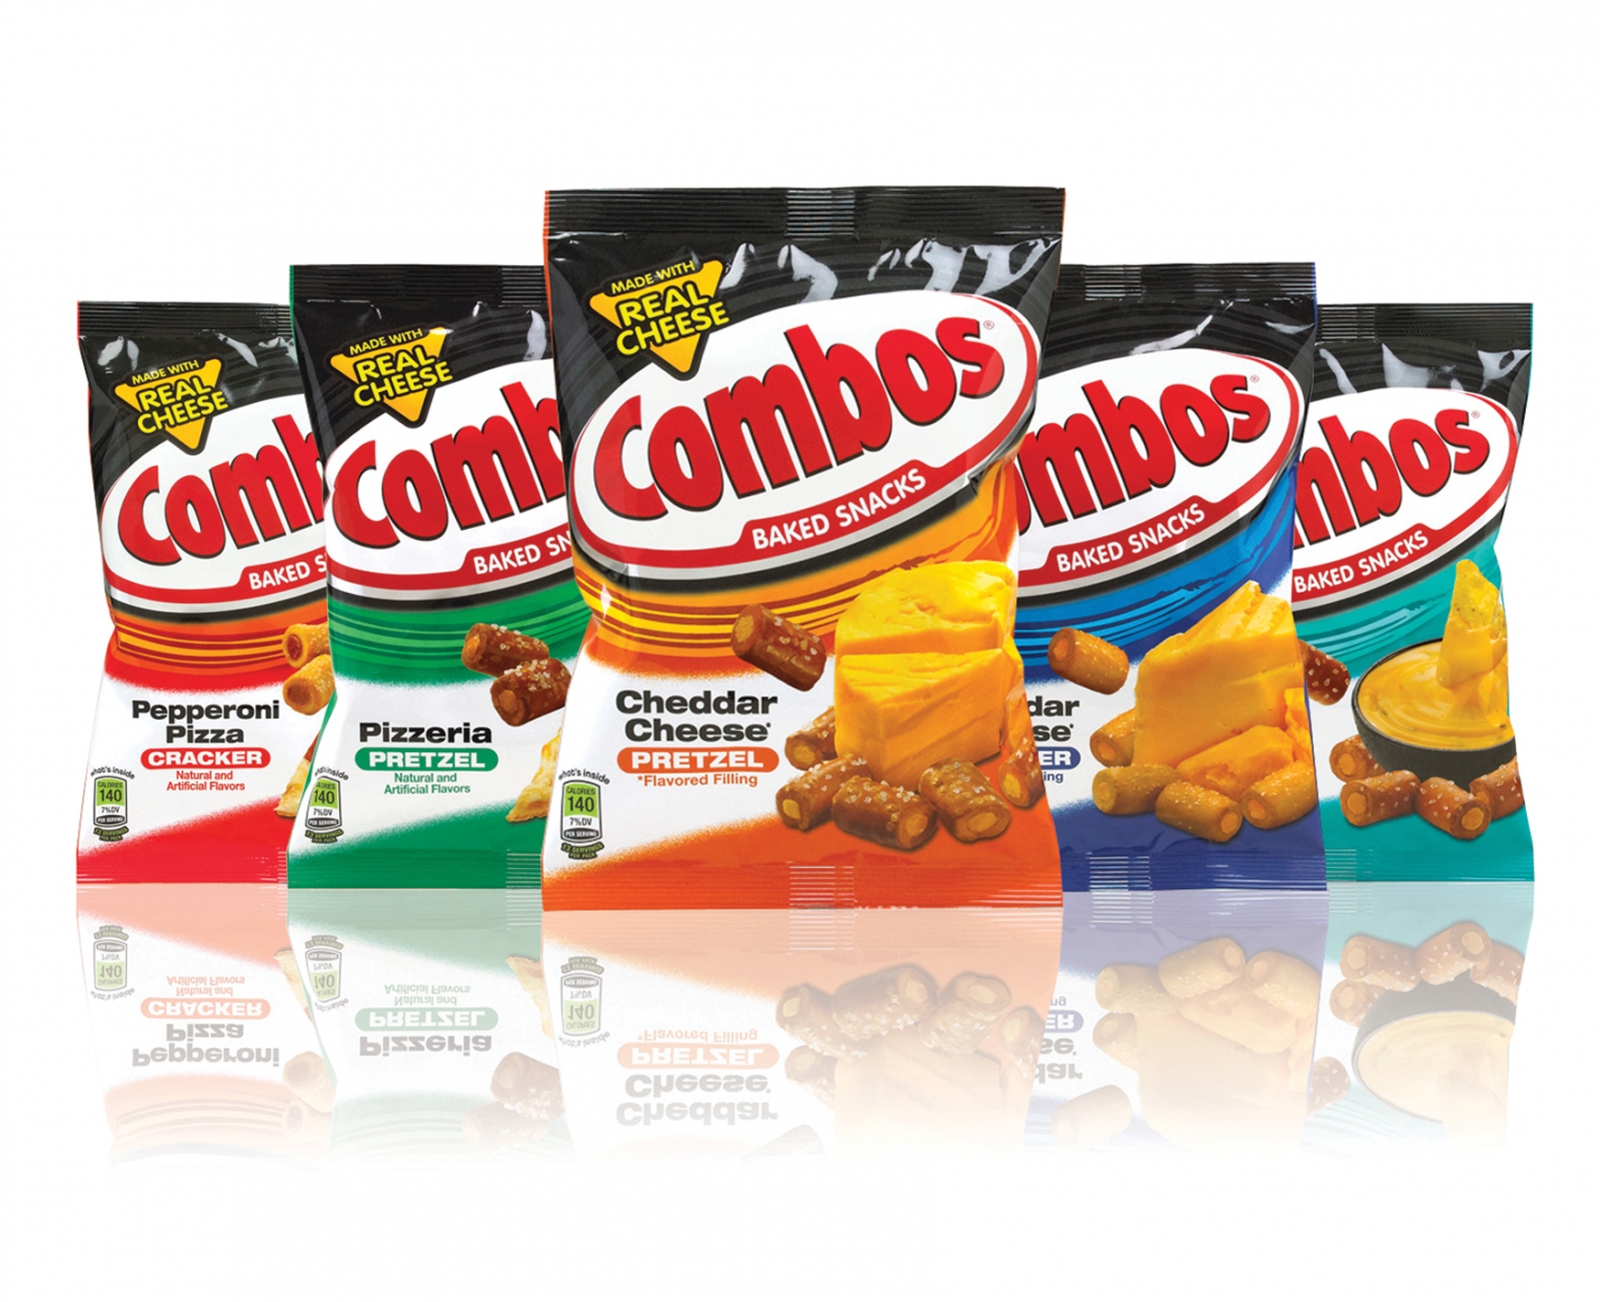 Just combos.